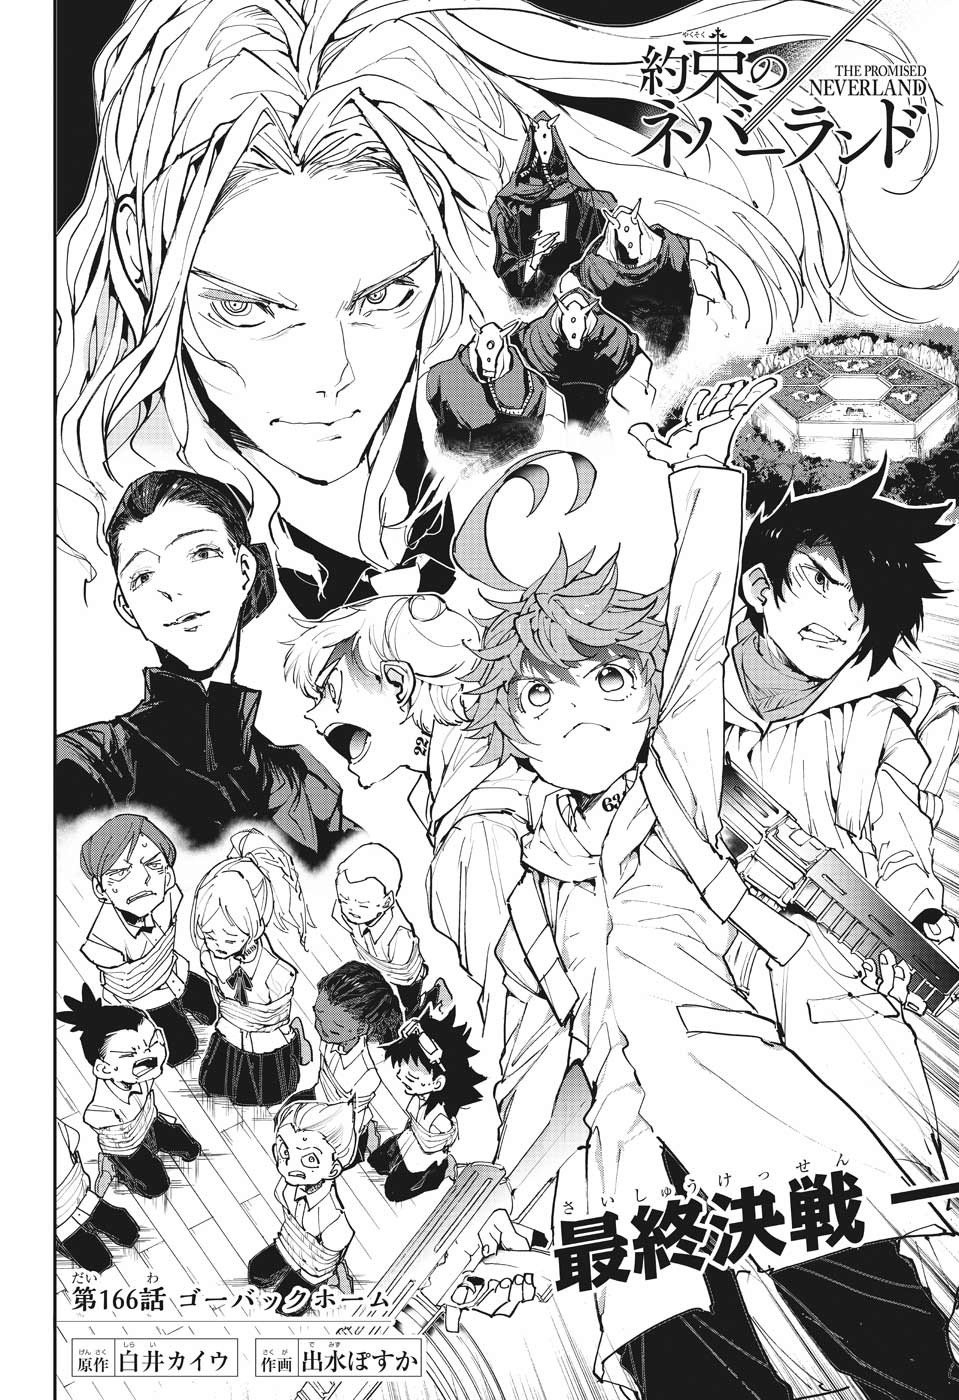 Chapter 166 The Promised Neverland Wiki Fandom